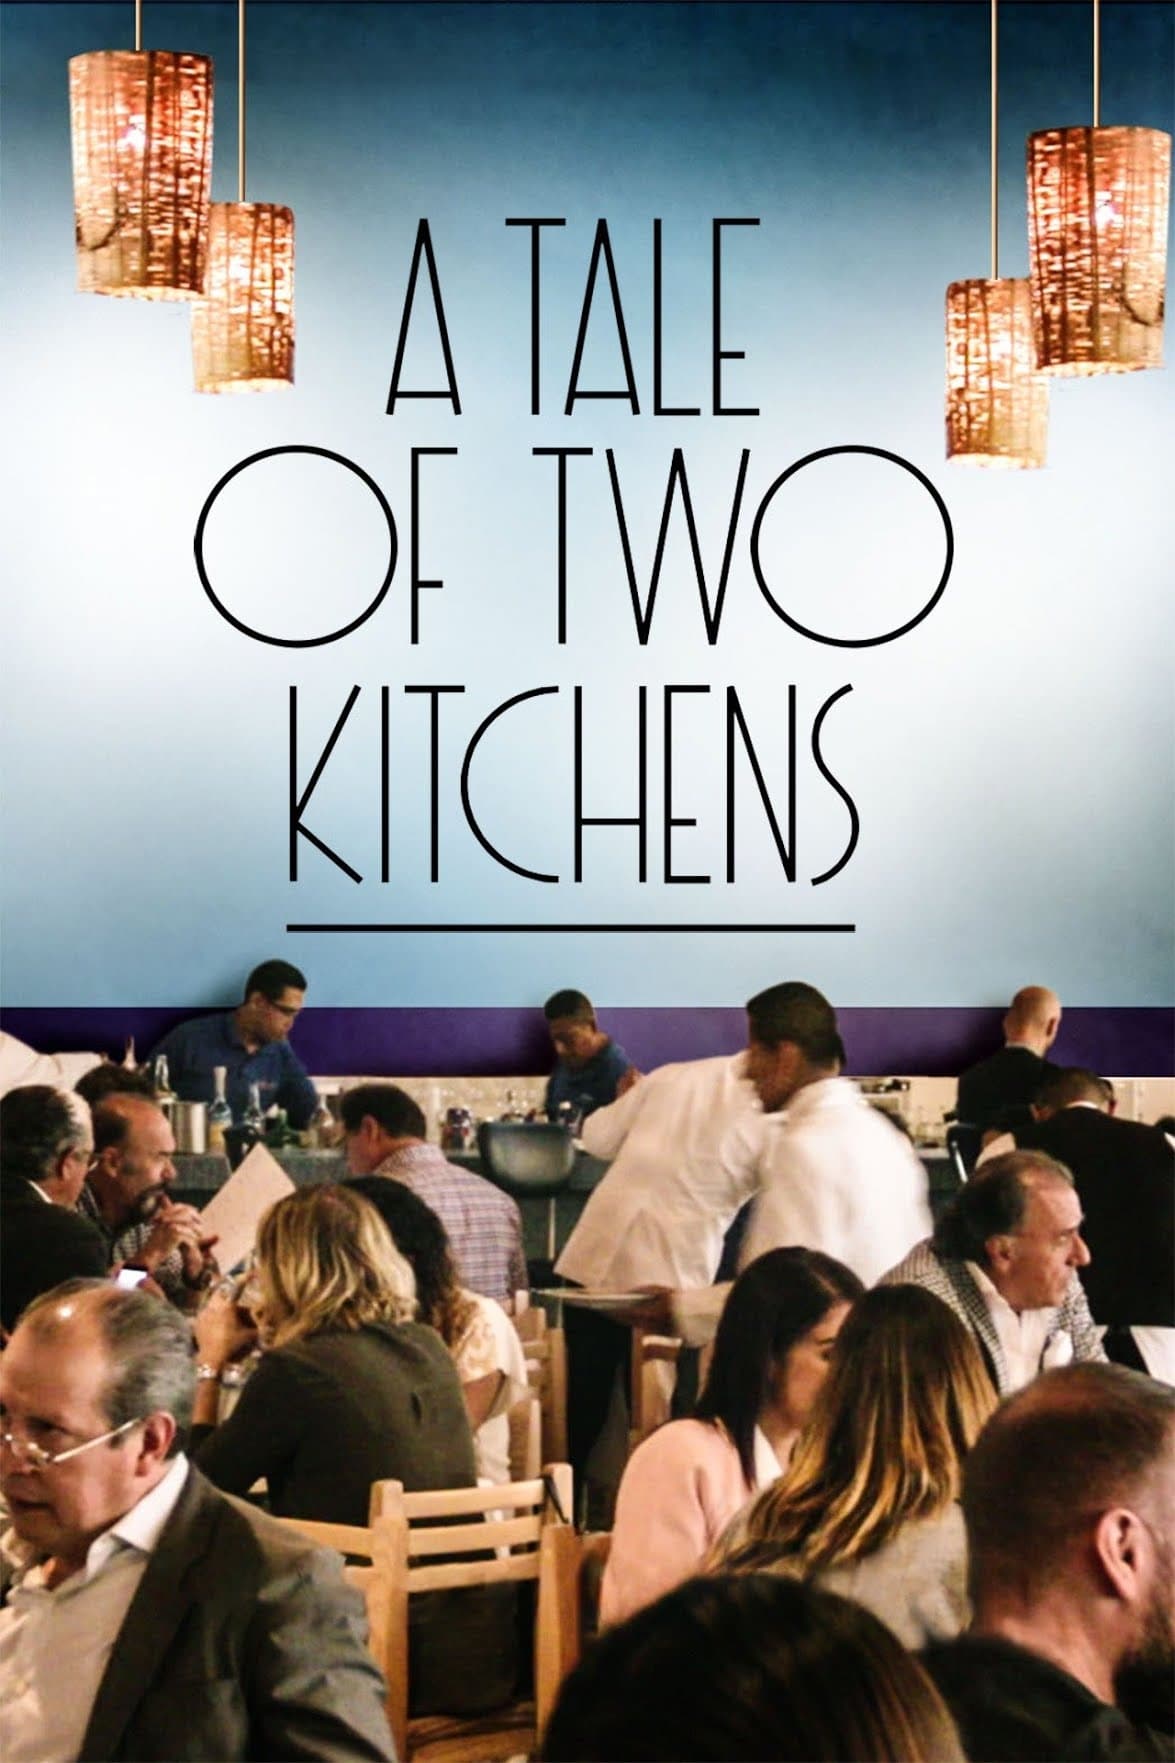 A Tale of Two Kitchens